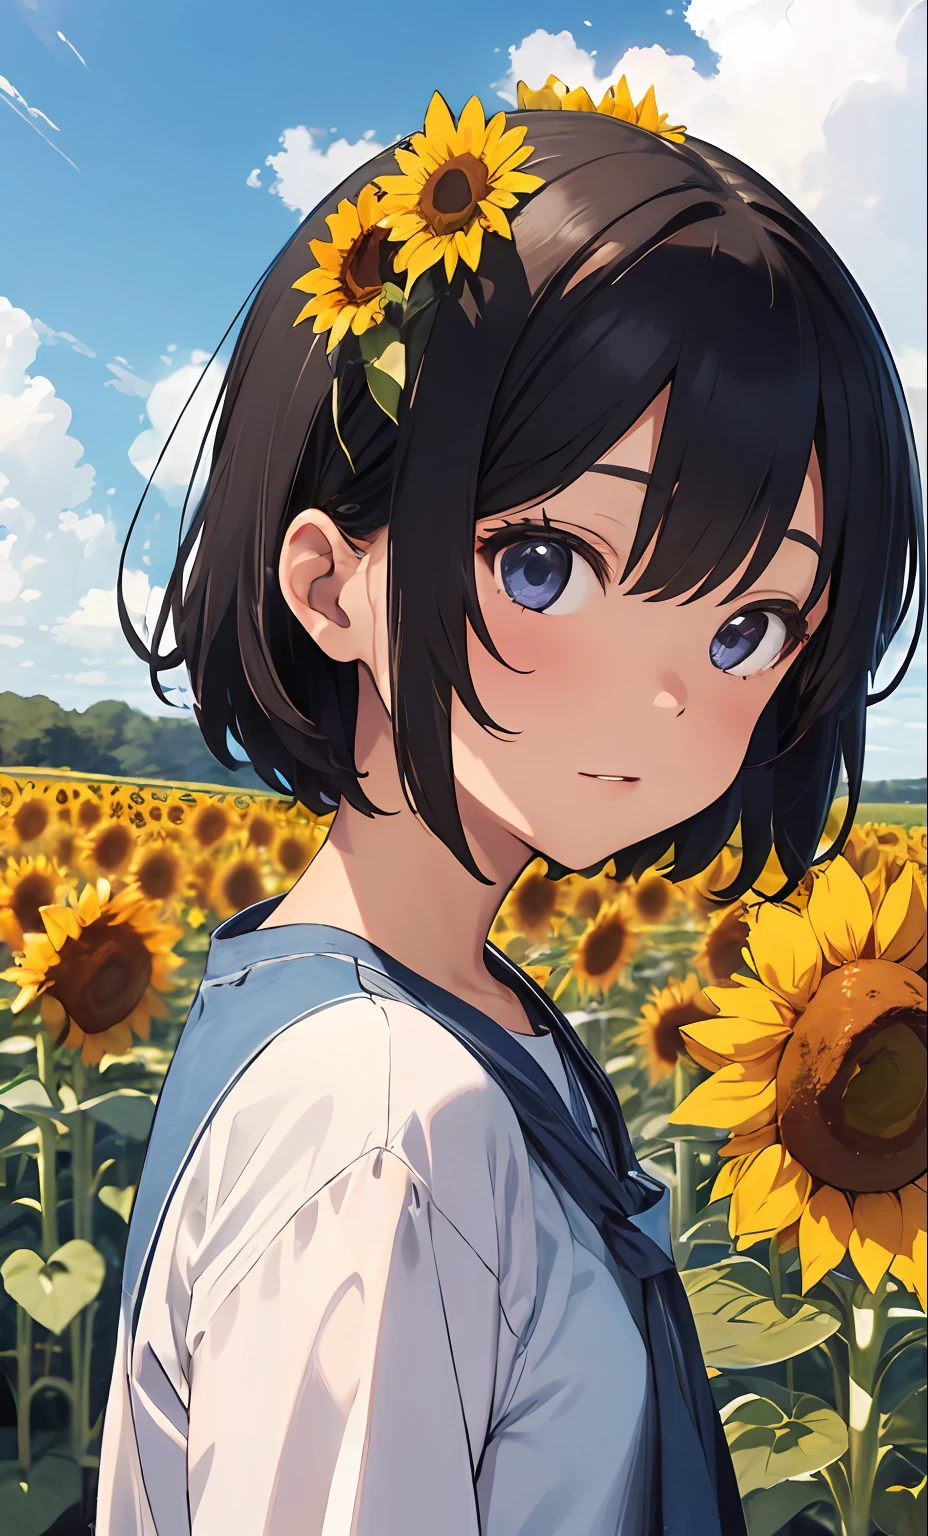 Anime girl with sunflower in her hair standing in a field of 